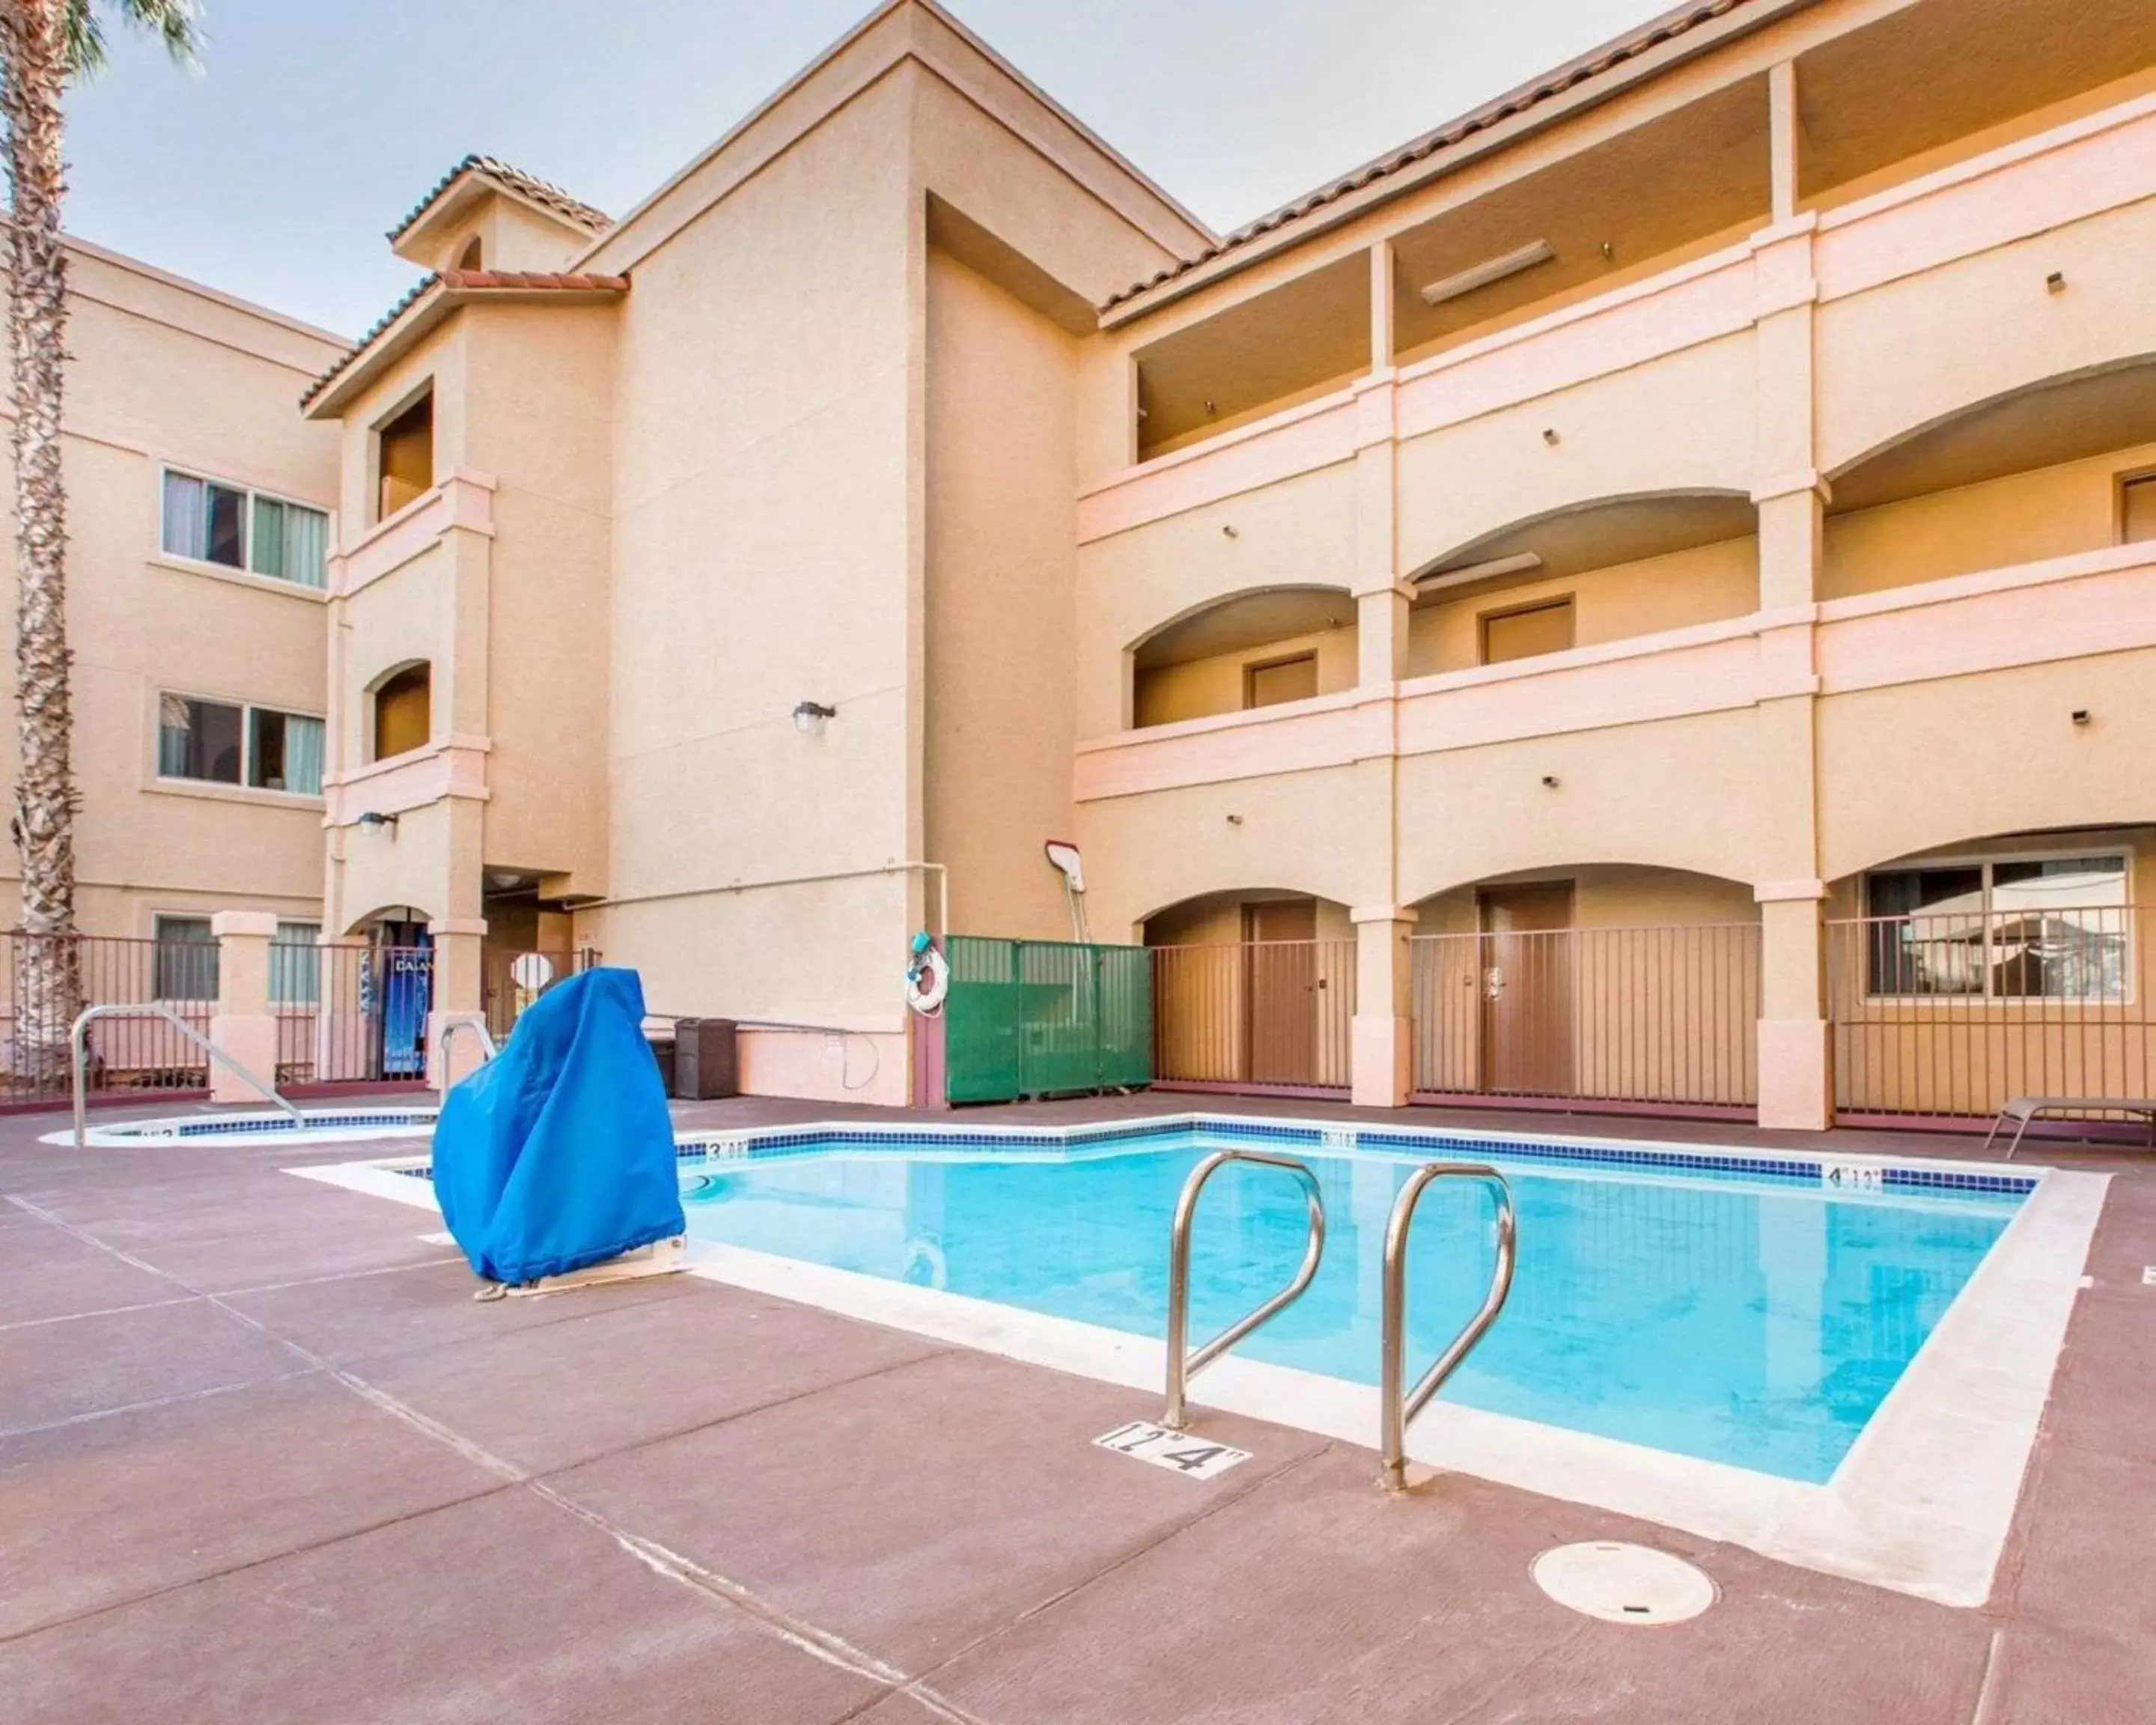 On site, Swimming Pool in Comfort Inn & Suites Moreno Valley near March Air Reserve Base